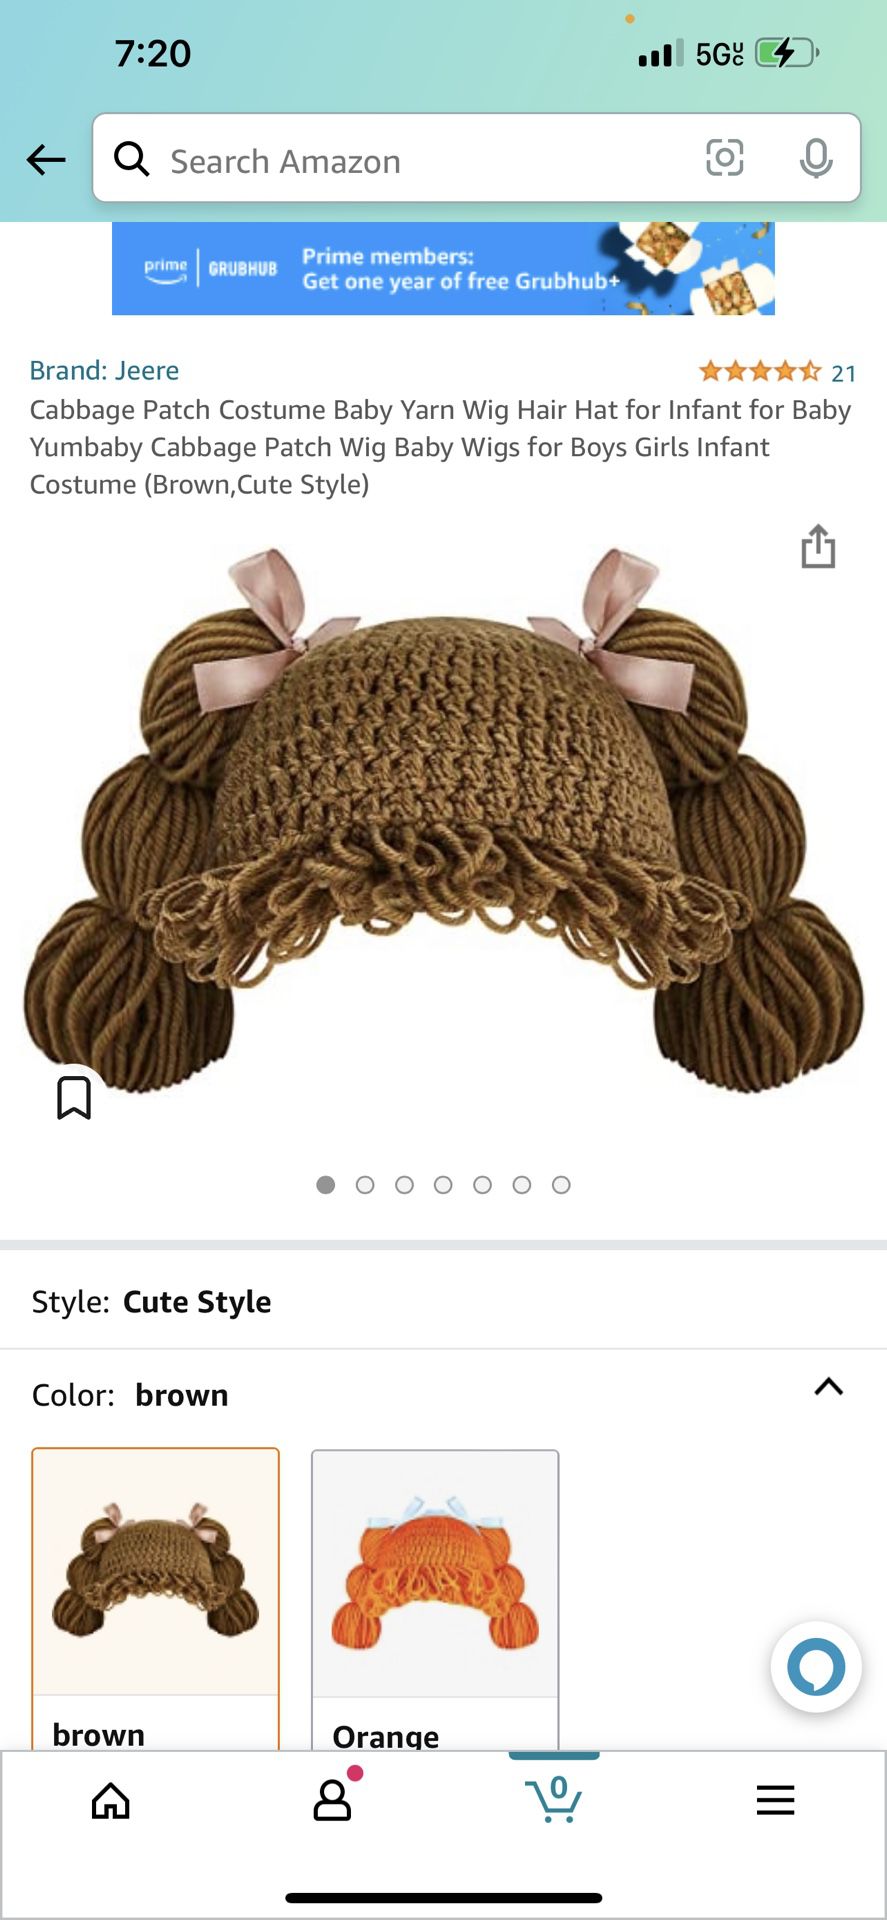 Cabbage Patch Costume Baby Yarn Wig Hair Hat for Infant for Baby Yumbaby Cabbage Patch Wig Baby Wigs for Boys Girls Infant Costume (Brown,Cute Style)